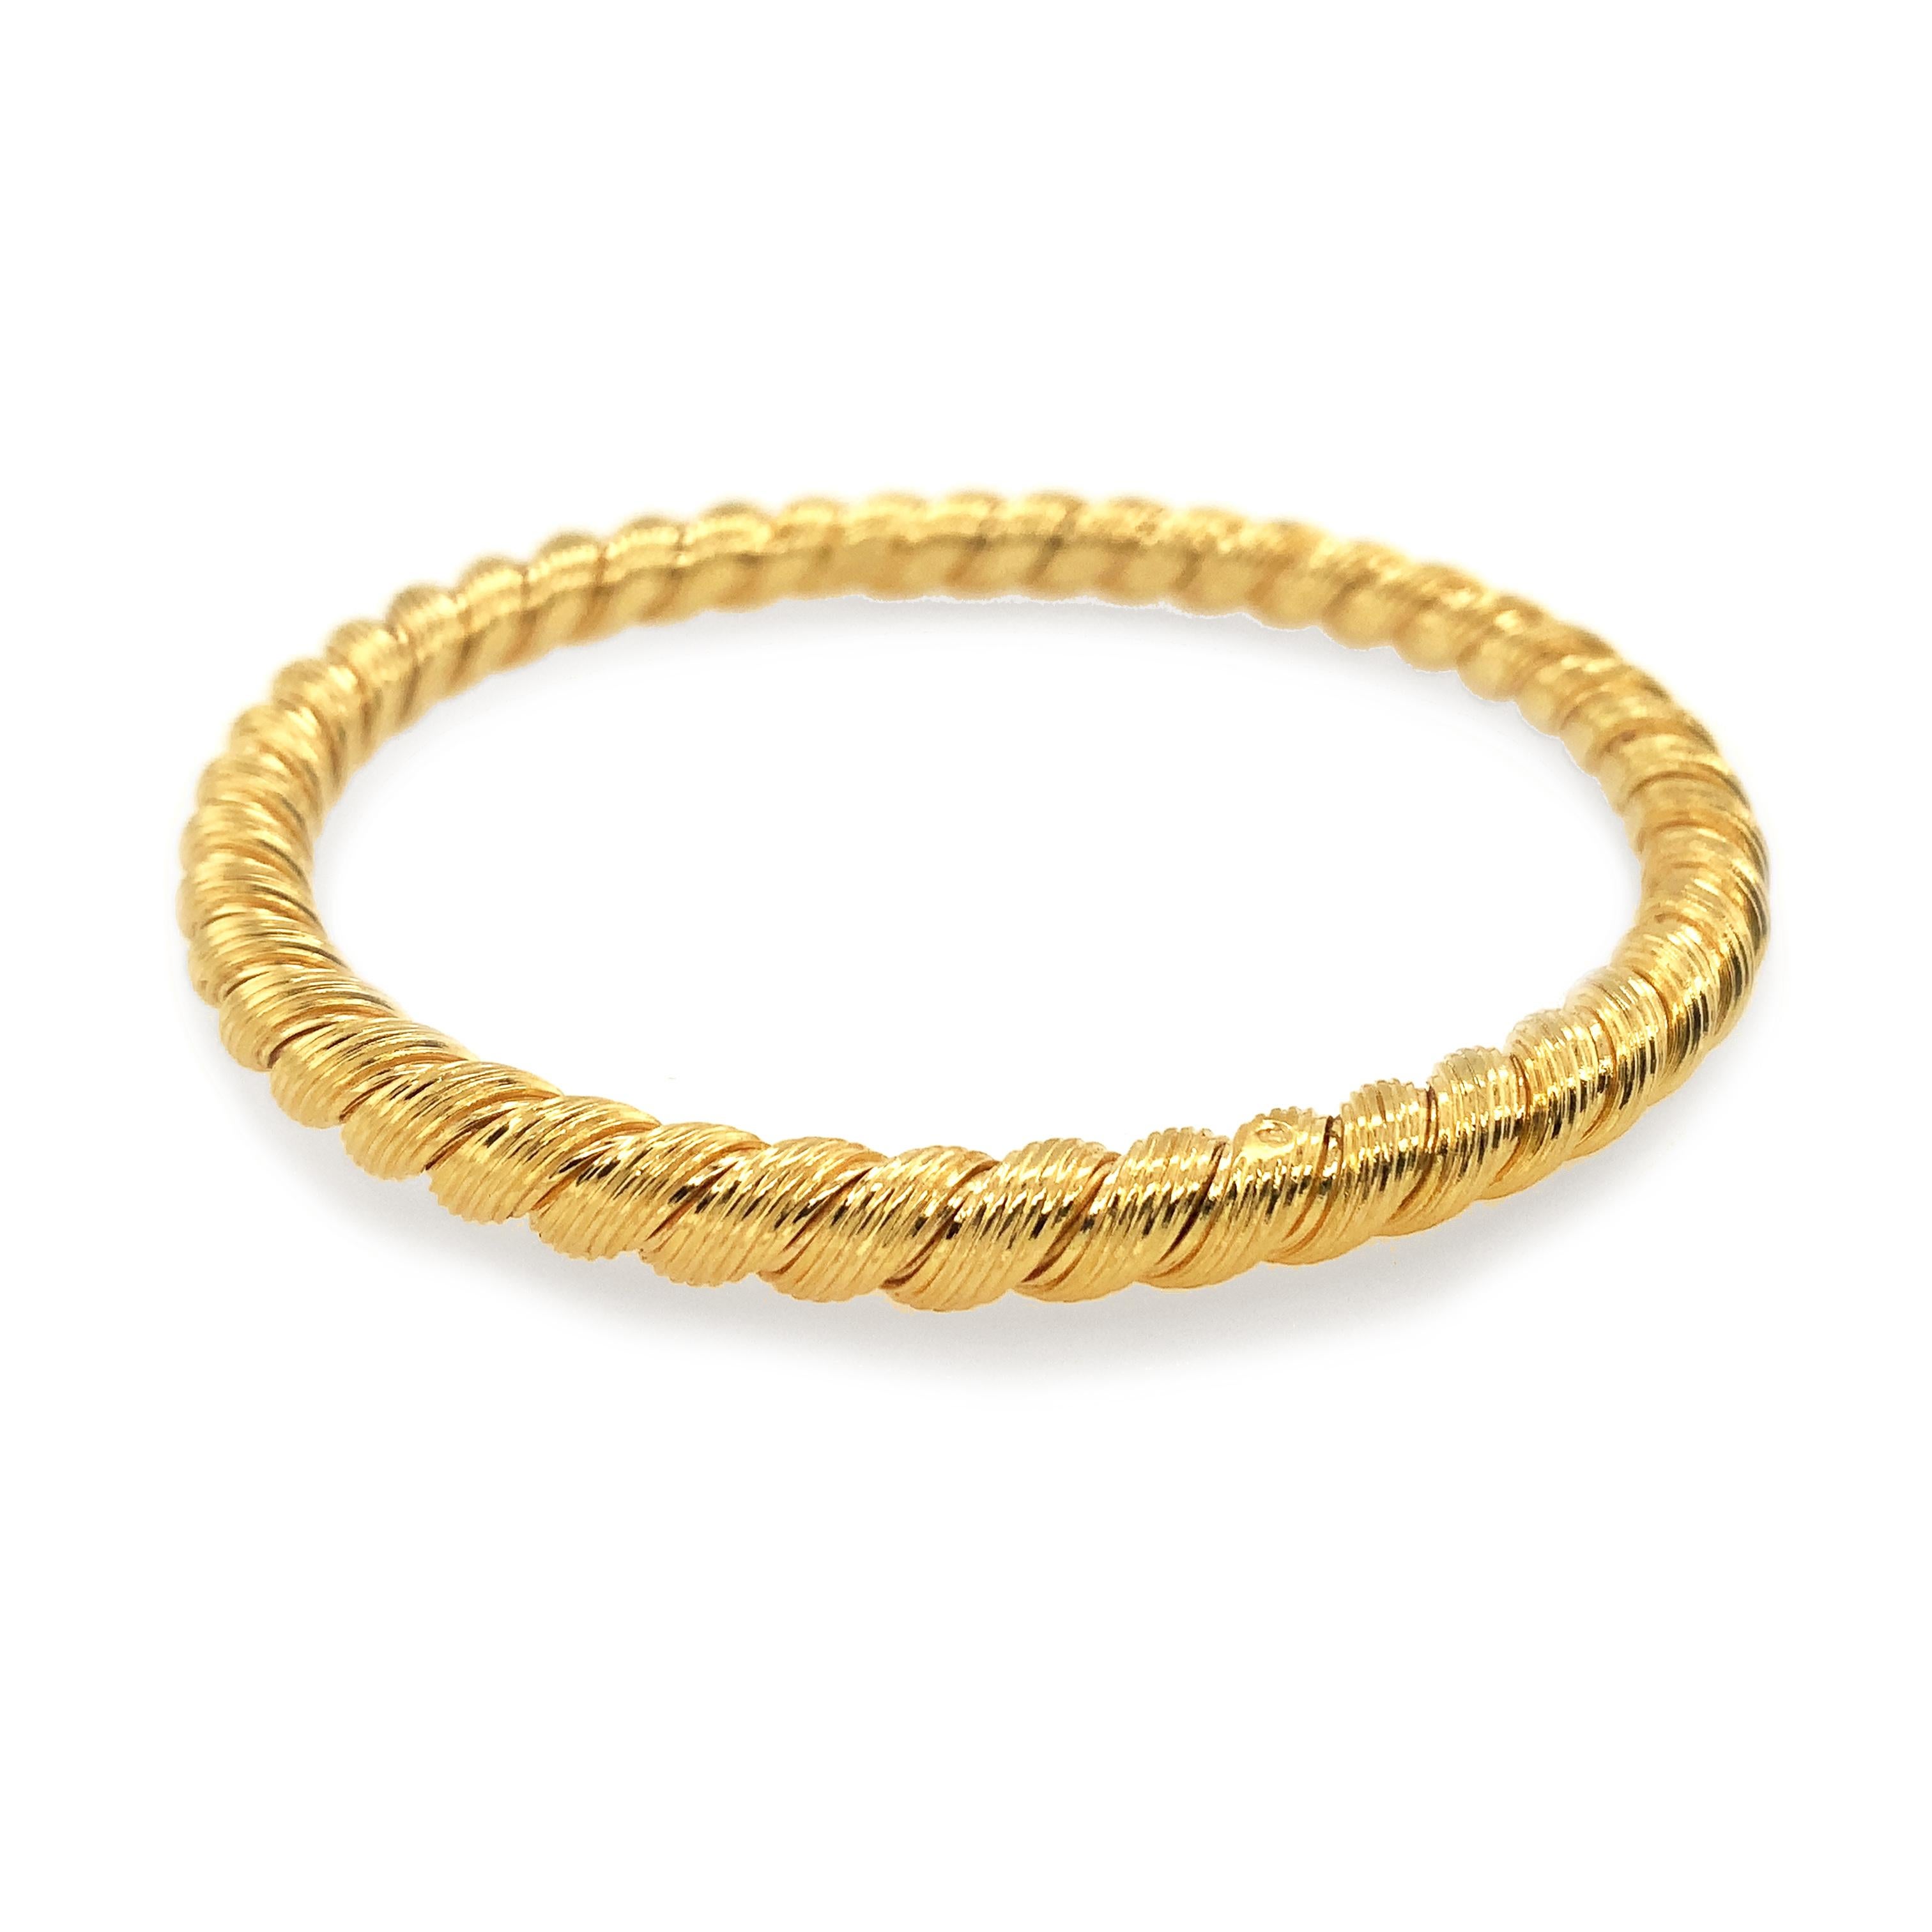 Elegant set of two bangle bracelets.  Made and signed by VAN CLEEF & ARPELS France.  Softly shimmering 18K yellow gold.  Each bracelet is hand woven, in a subtle line pattern and twisted to create a rope pattern.  The bracelets have a slightly